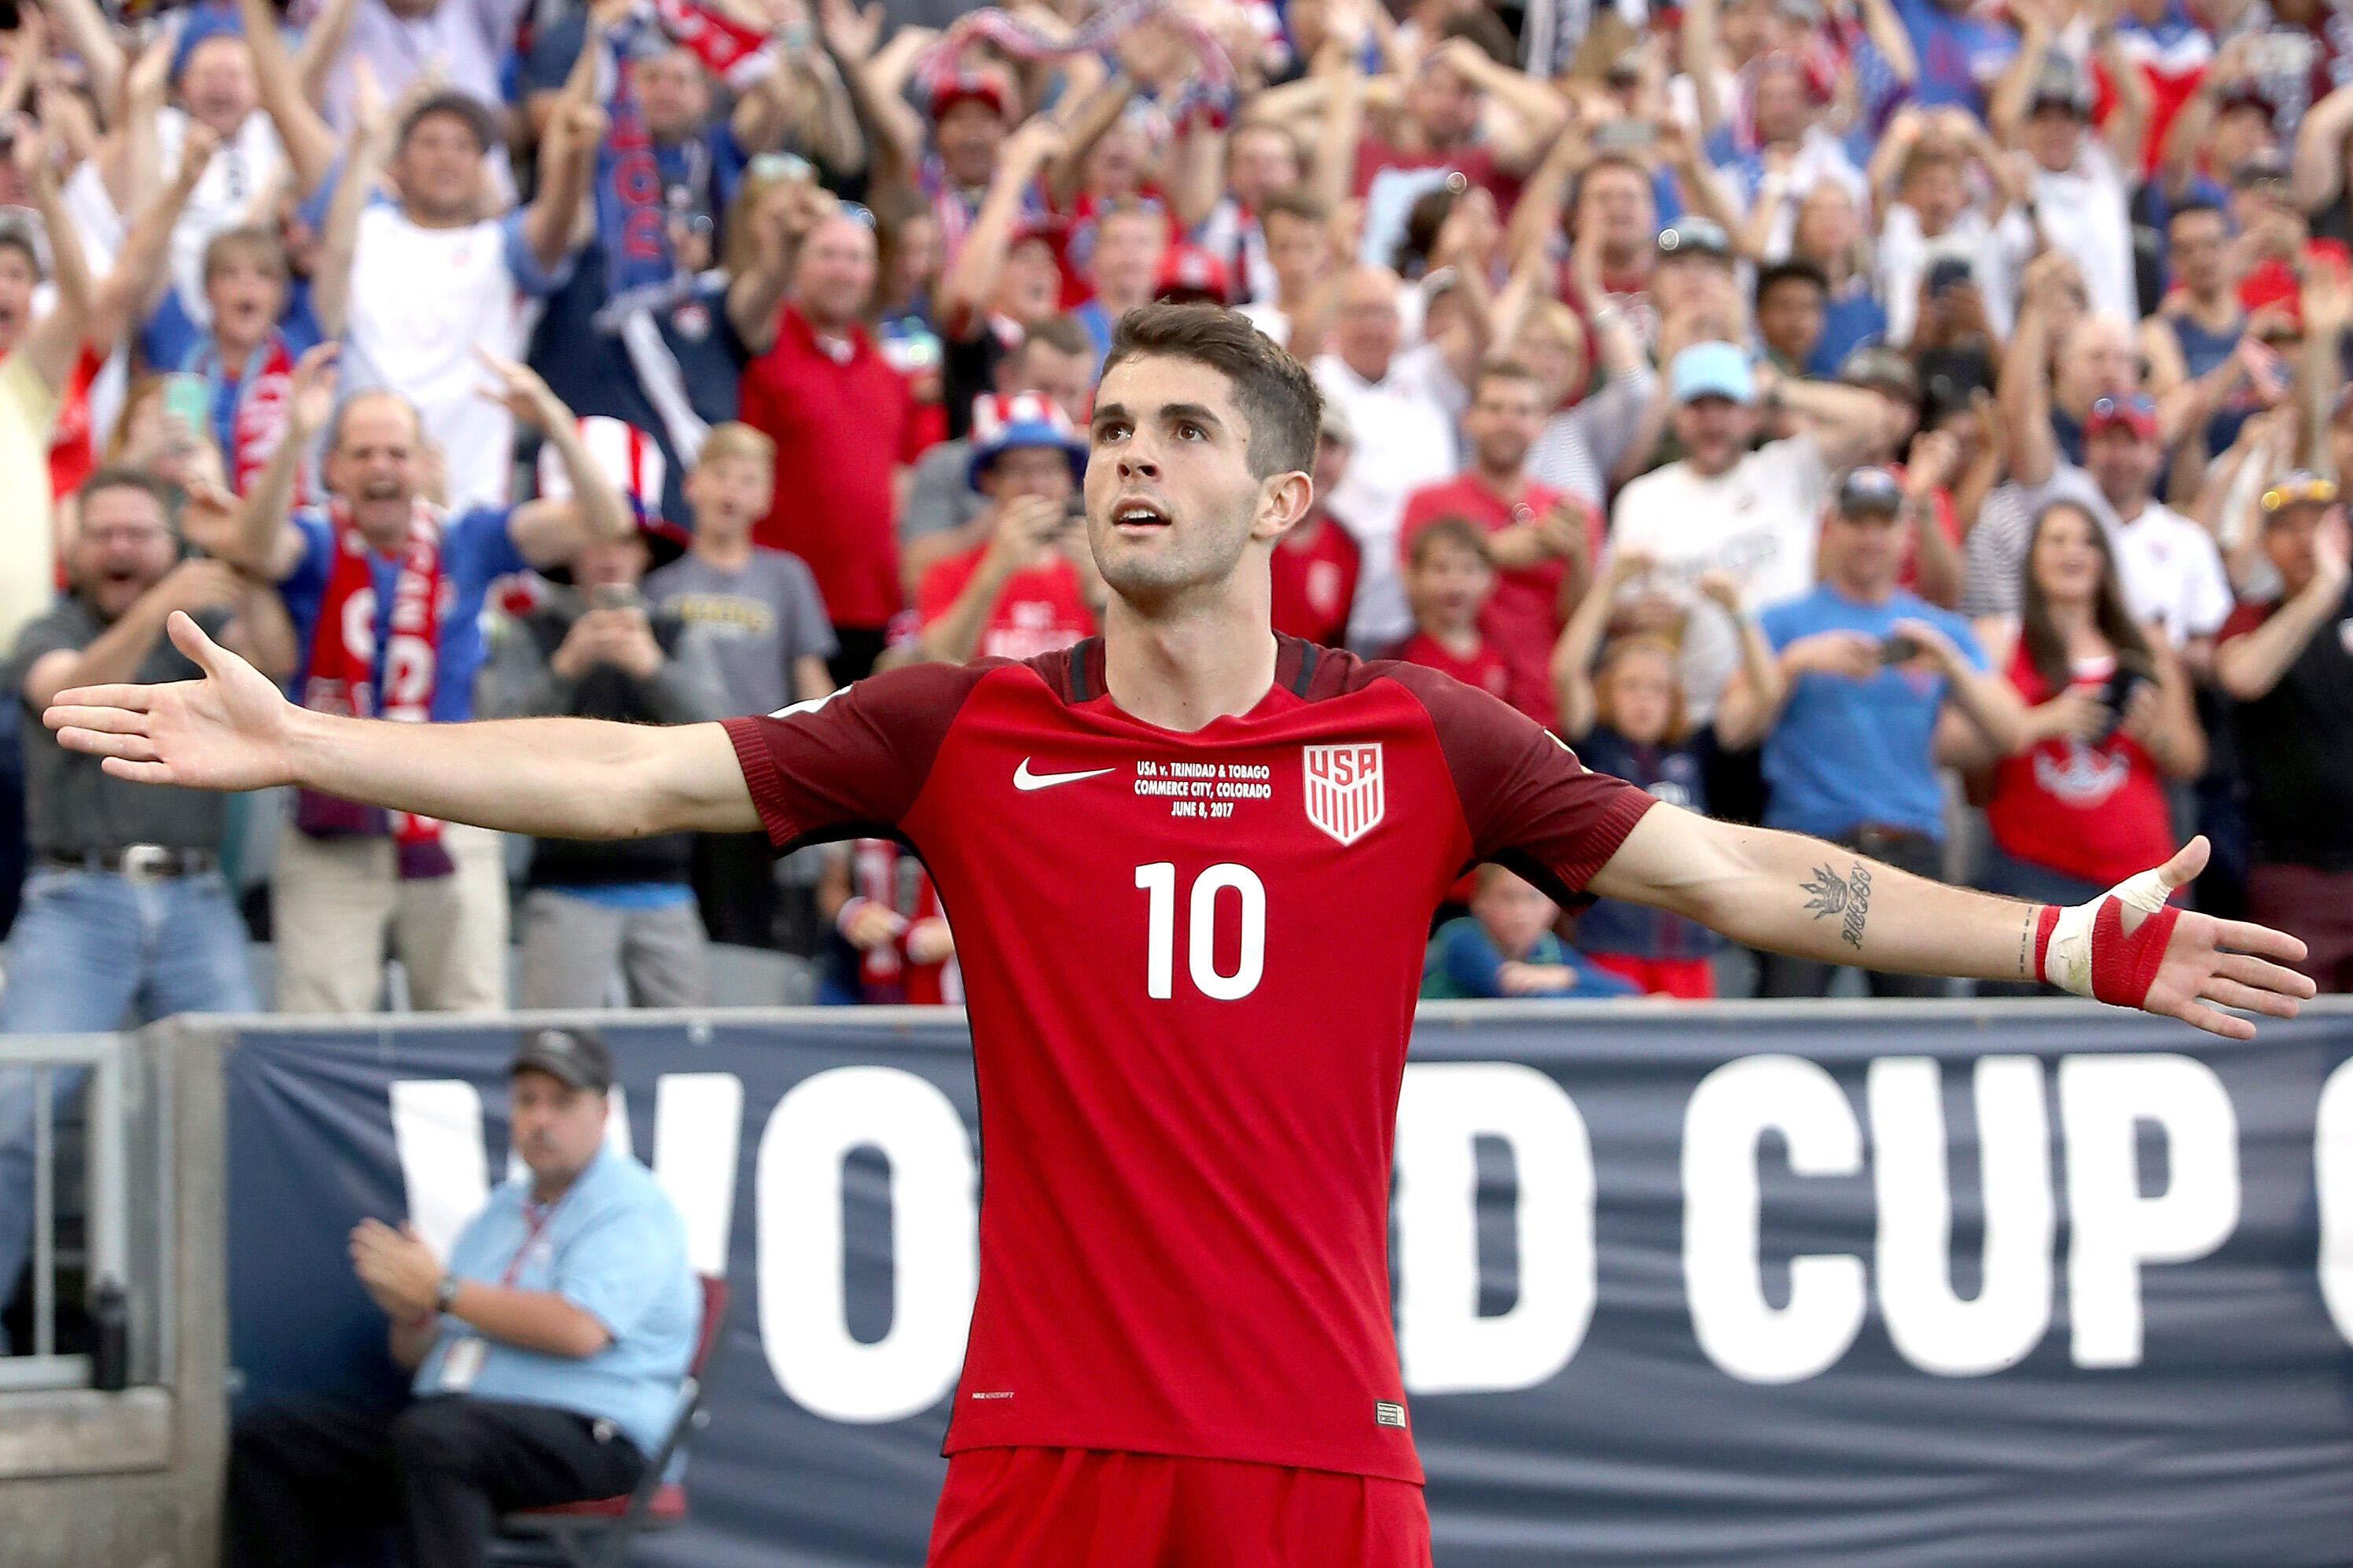 COMMERCE CITY, CO - JUNE 08:  Christian Pulisic #10 of the U.S. National Team celebrates scoring a goal against Trinidad & Tabago in the second half during the FIFA 2018 World Cup Qualifier at Dick's Sporting Goods Park on June 8, 2017 in Commerce City, C